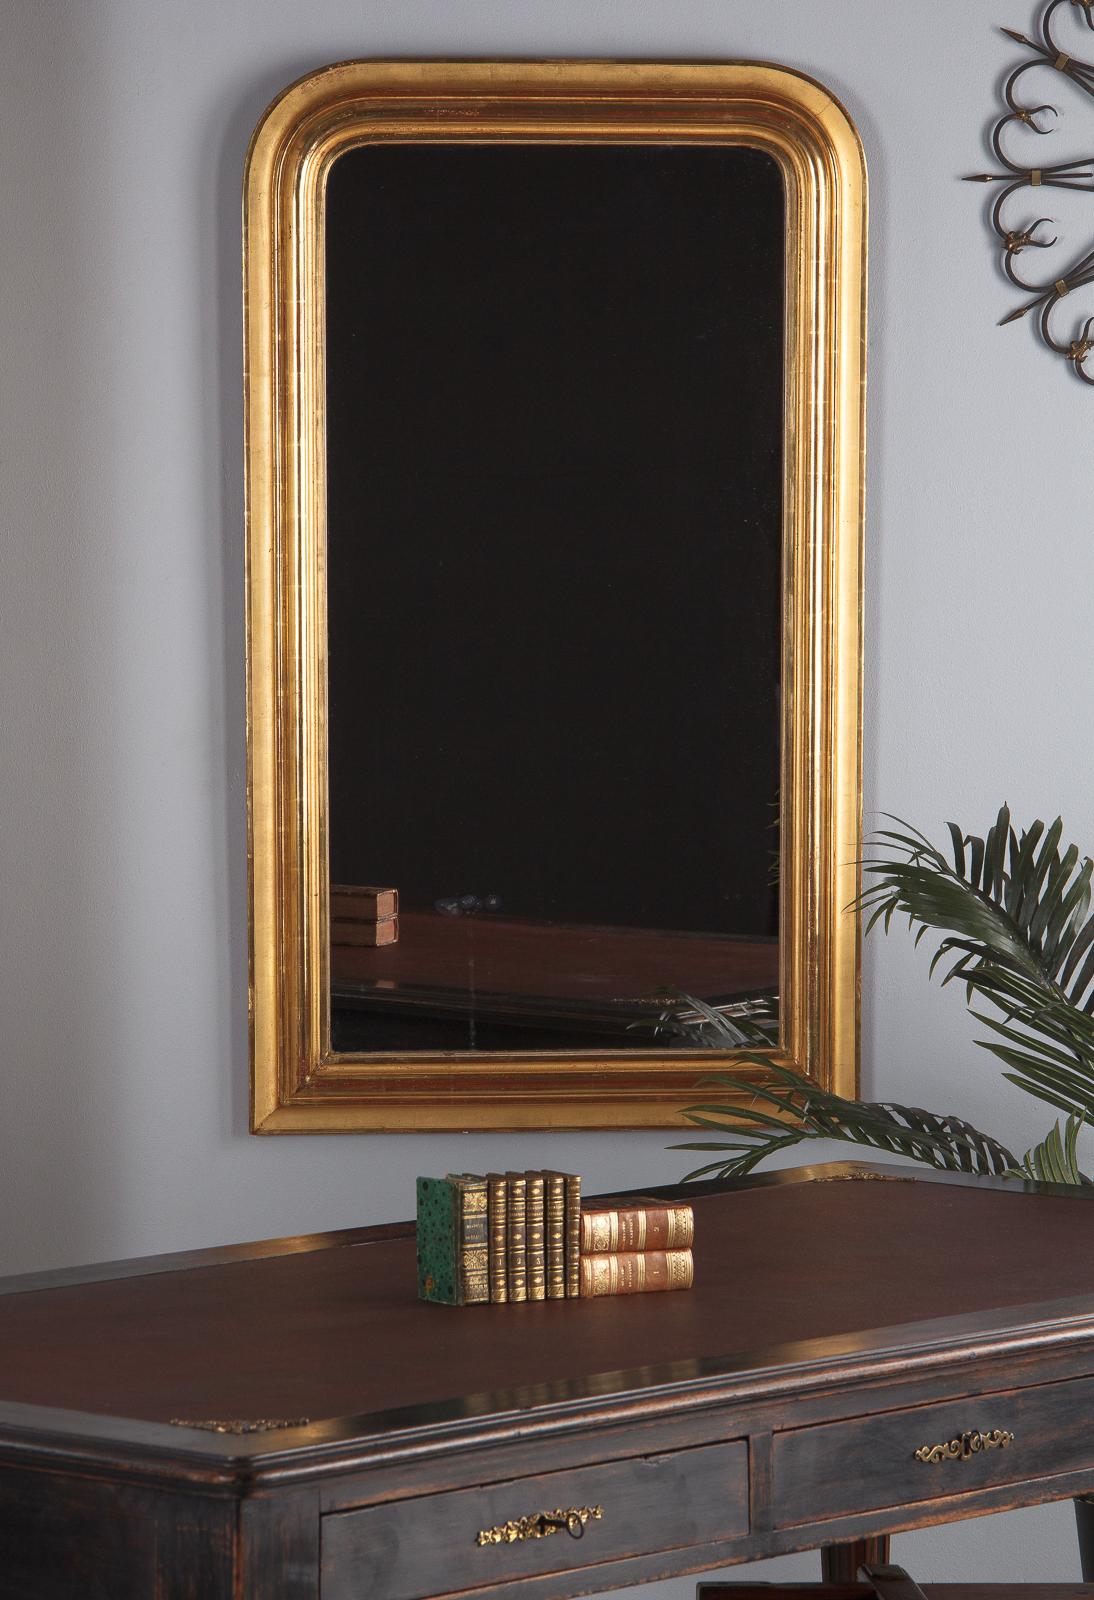 A classic, large gold leaf Louis Philippe mirror, French, circa 1850. All original with no restoration. Molded edge wood frame with arched top corners, gilt with alternating glossy and matte surfaces. Variation in gilding due to application, which